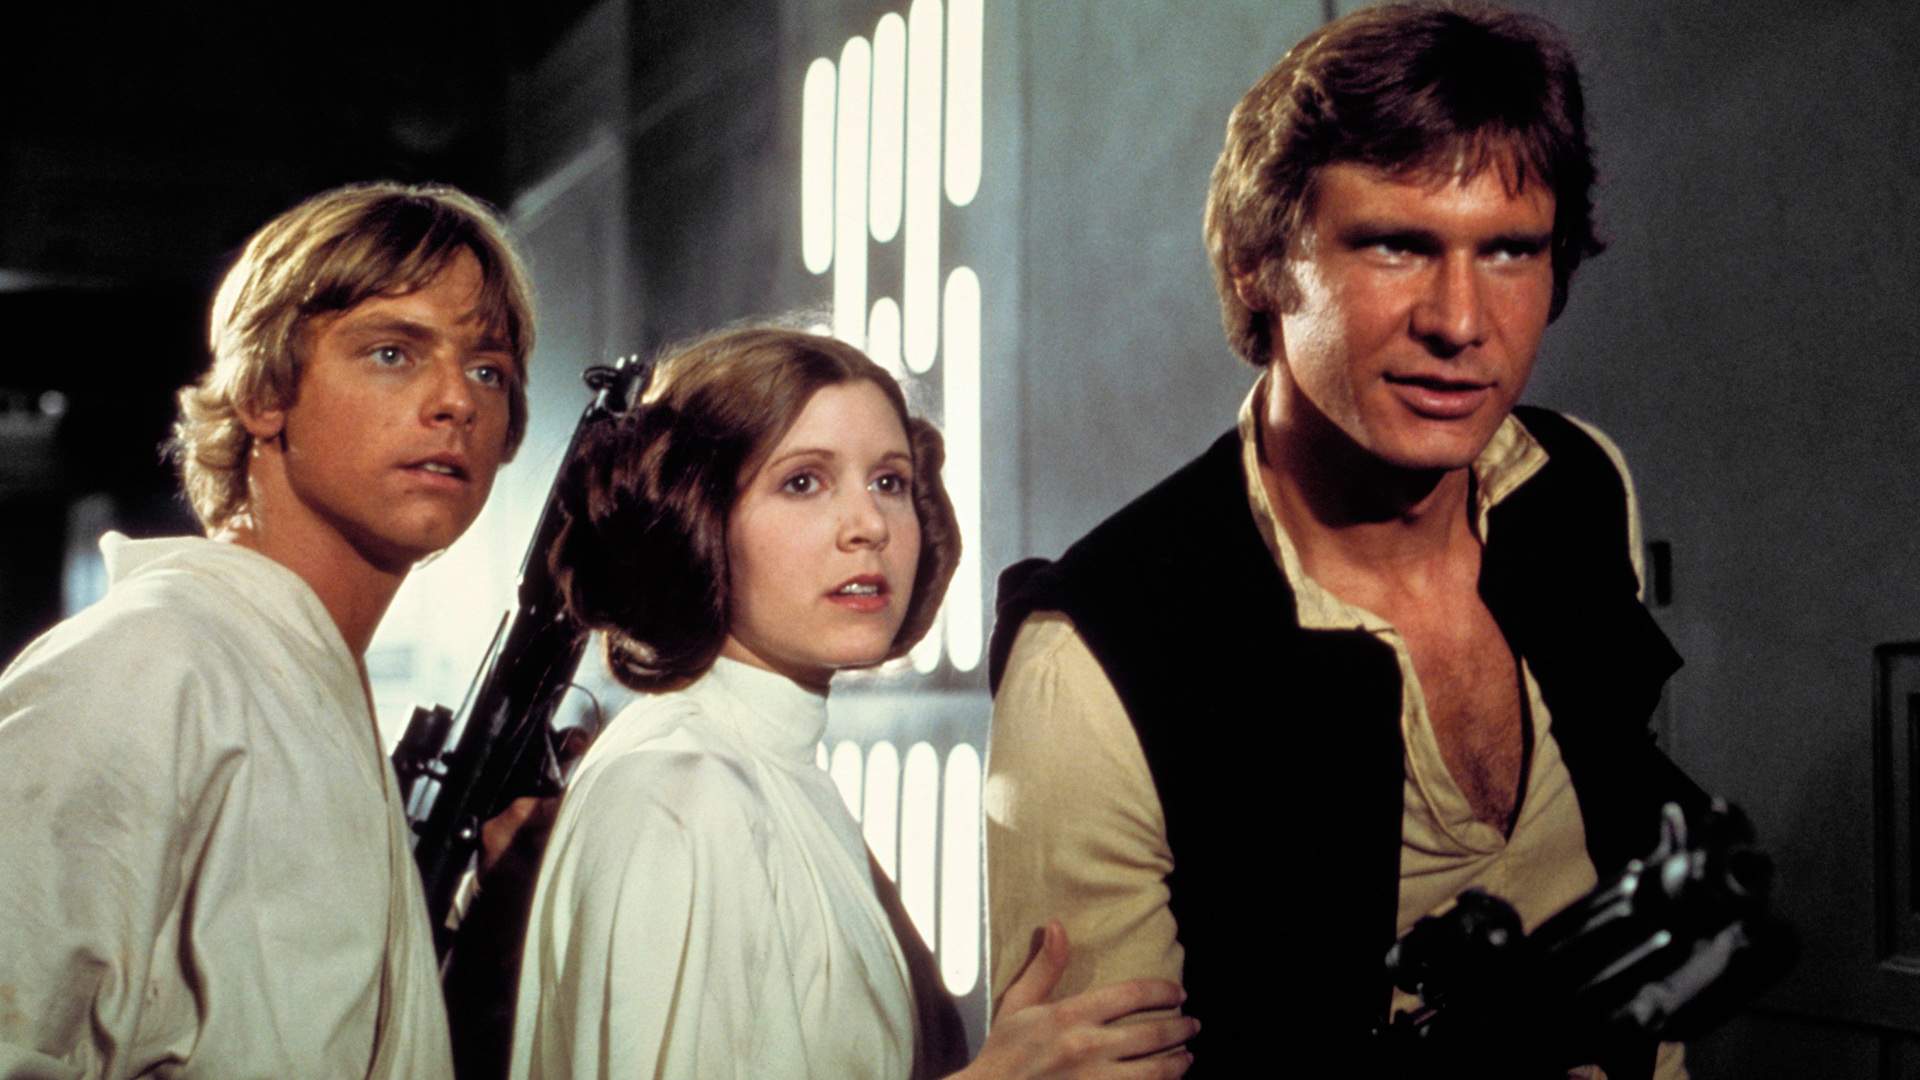 Melbourne Symphony Orchestra Is Screening 'Star Wars: A New Hope' and 'Frozen' with a Live Soundtrack